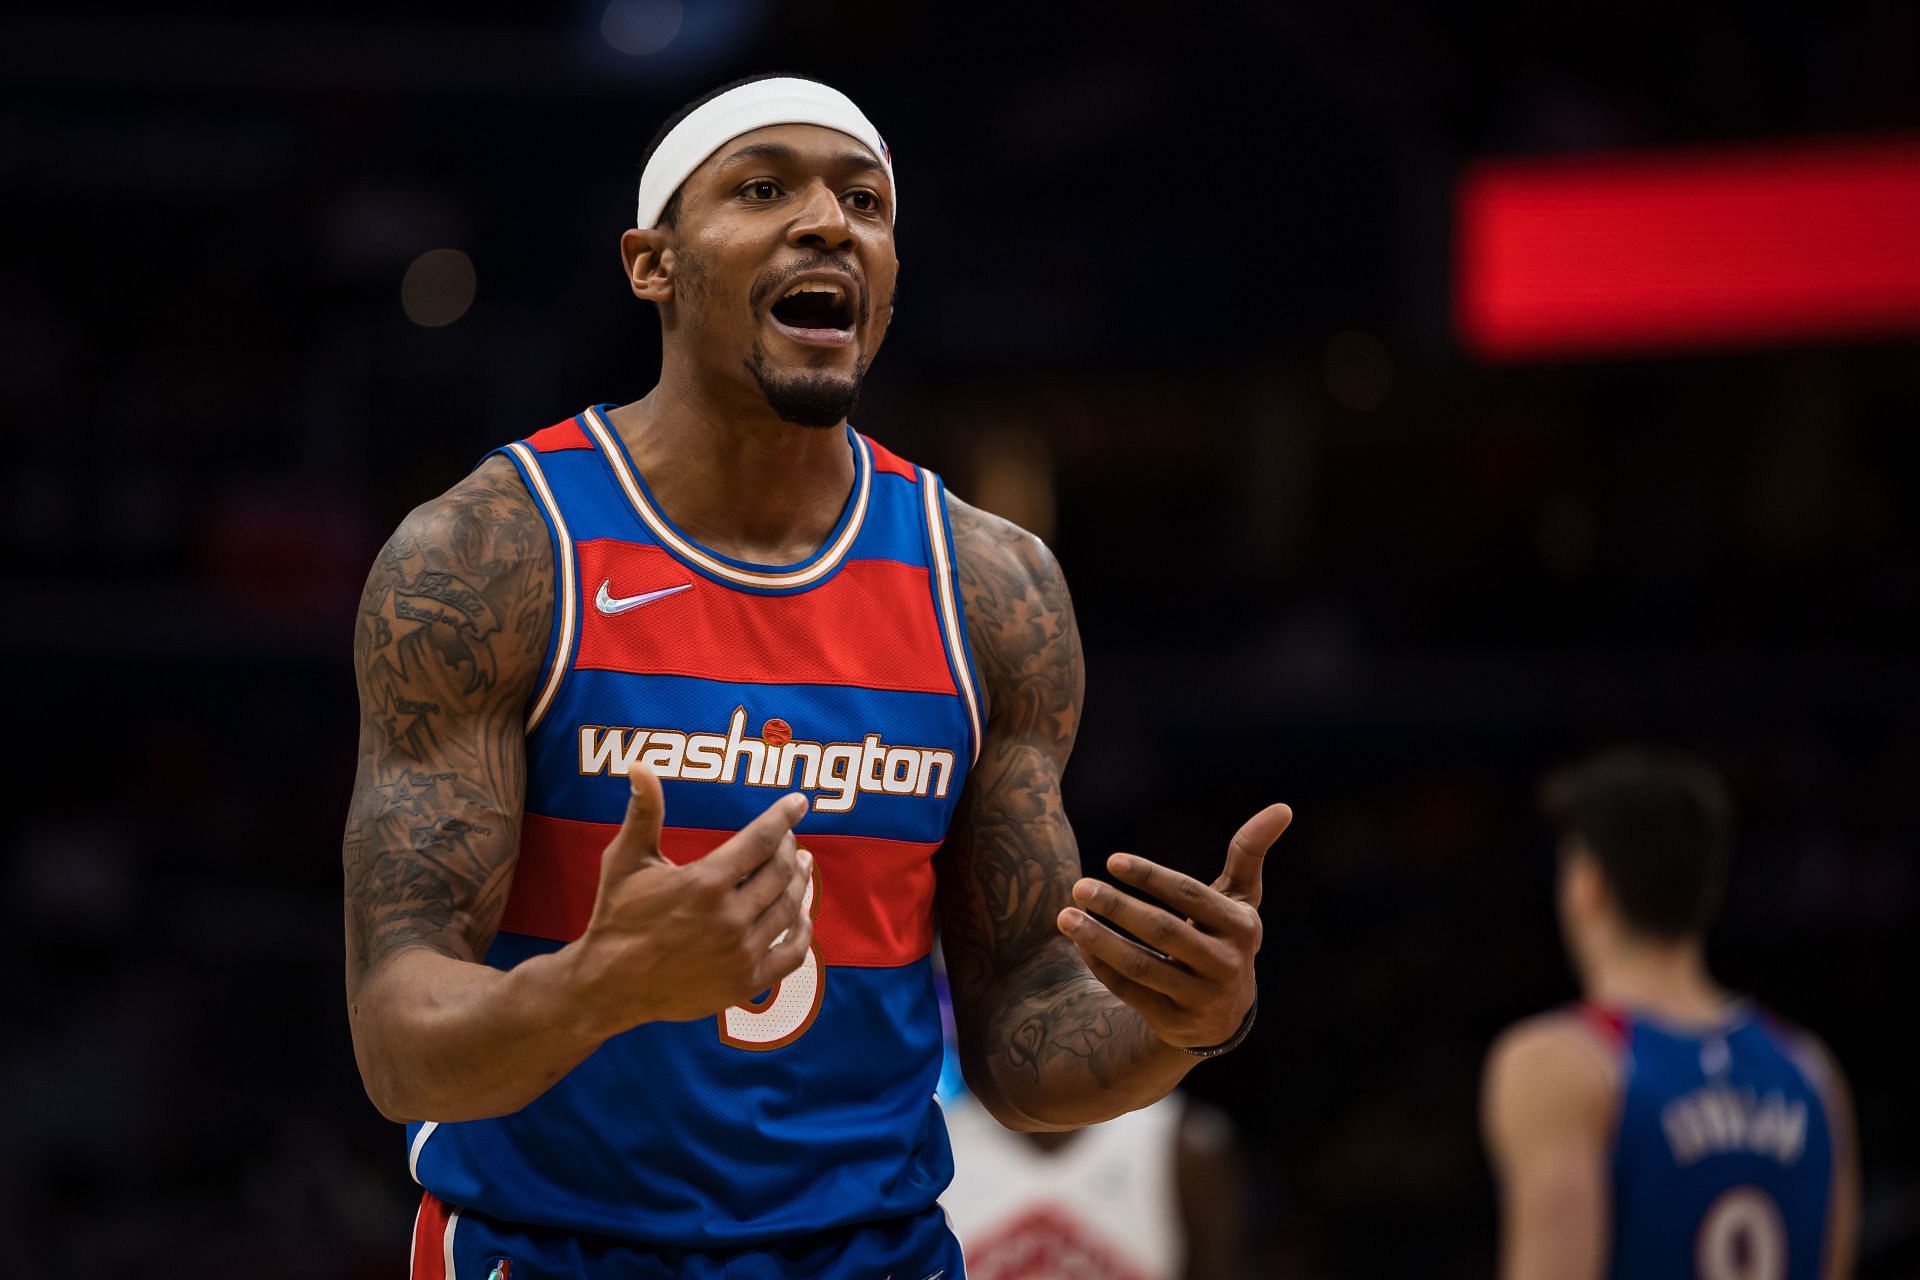 Bradley Beal's decision to decline his option could signal his desire isn't money.